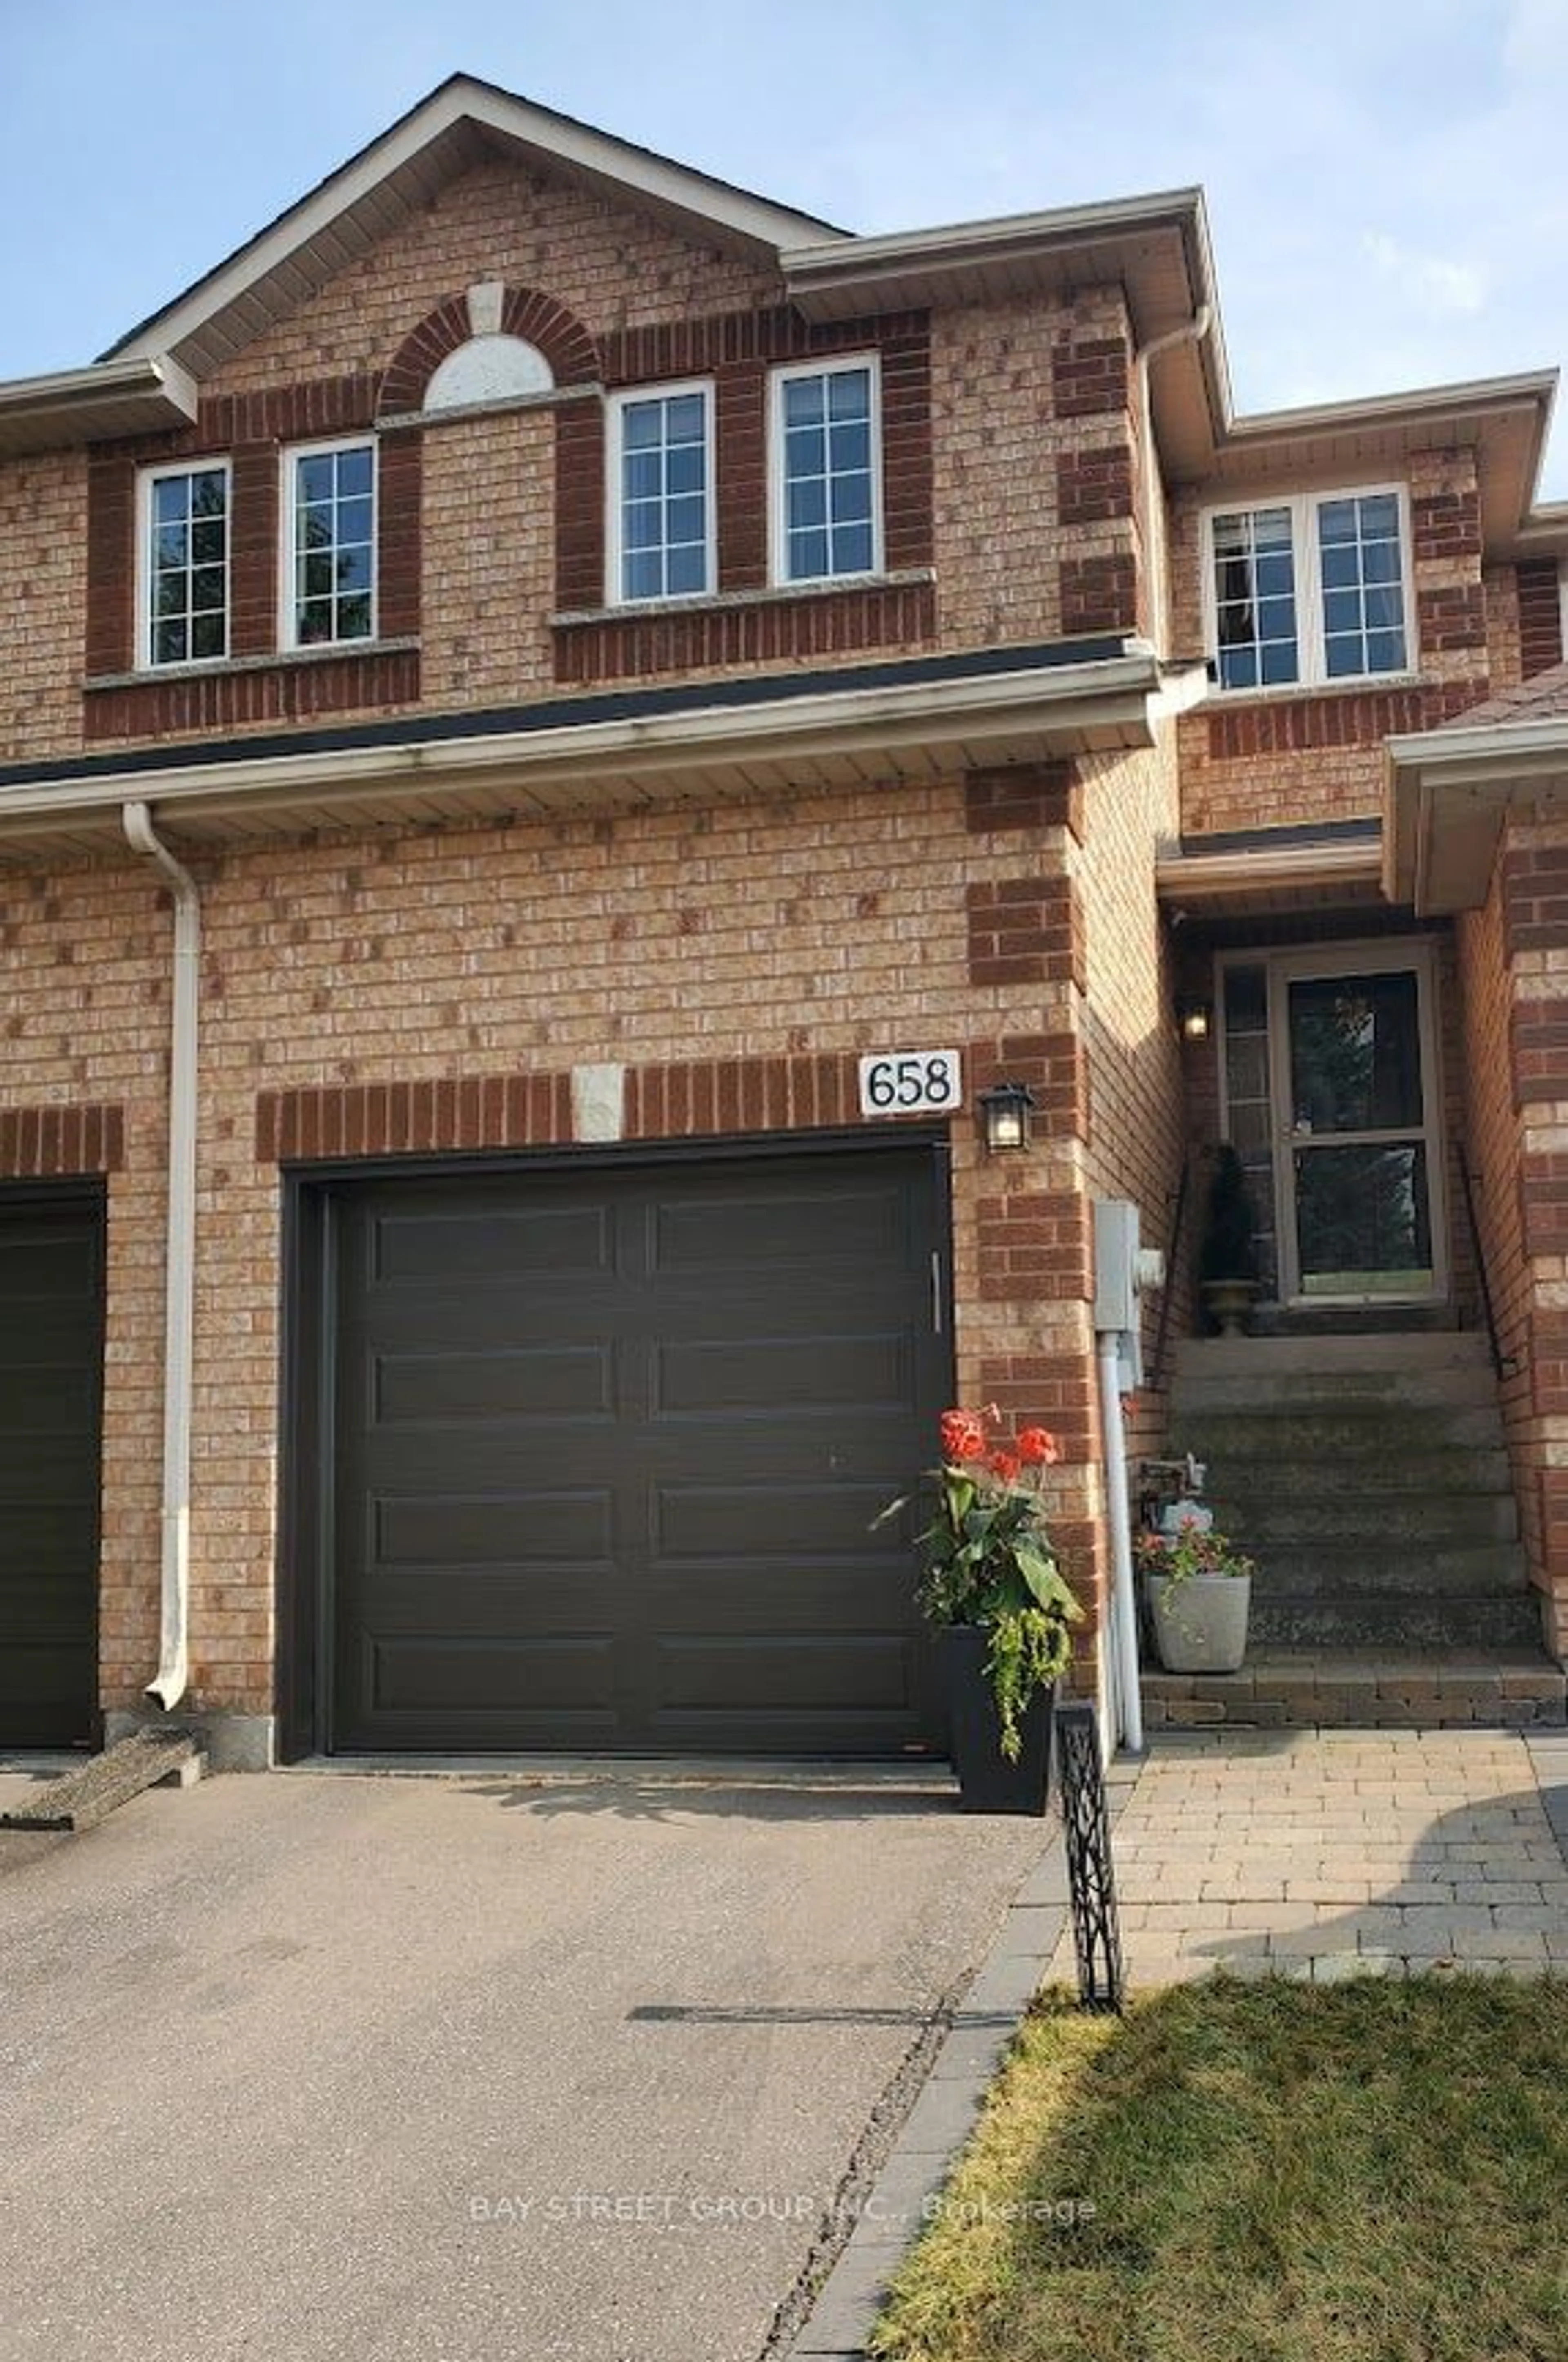 Home with brick exterior material for 658 Macnab Gate, Newmarket Ontario L3Y 8S5